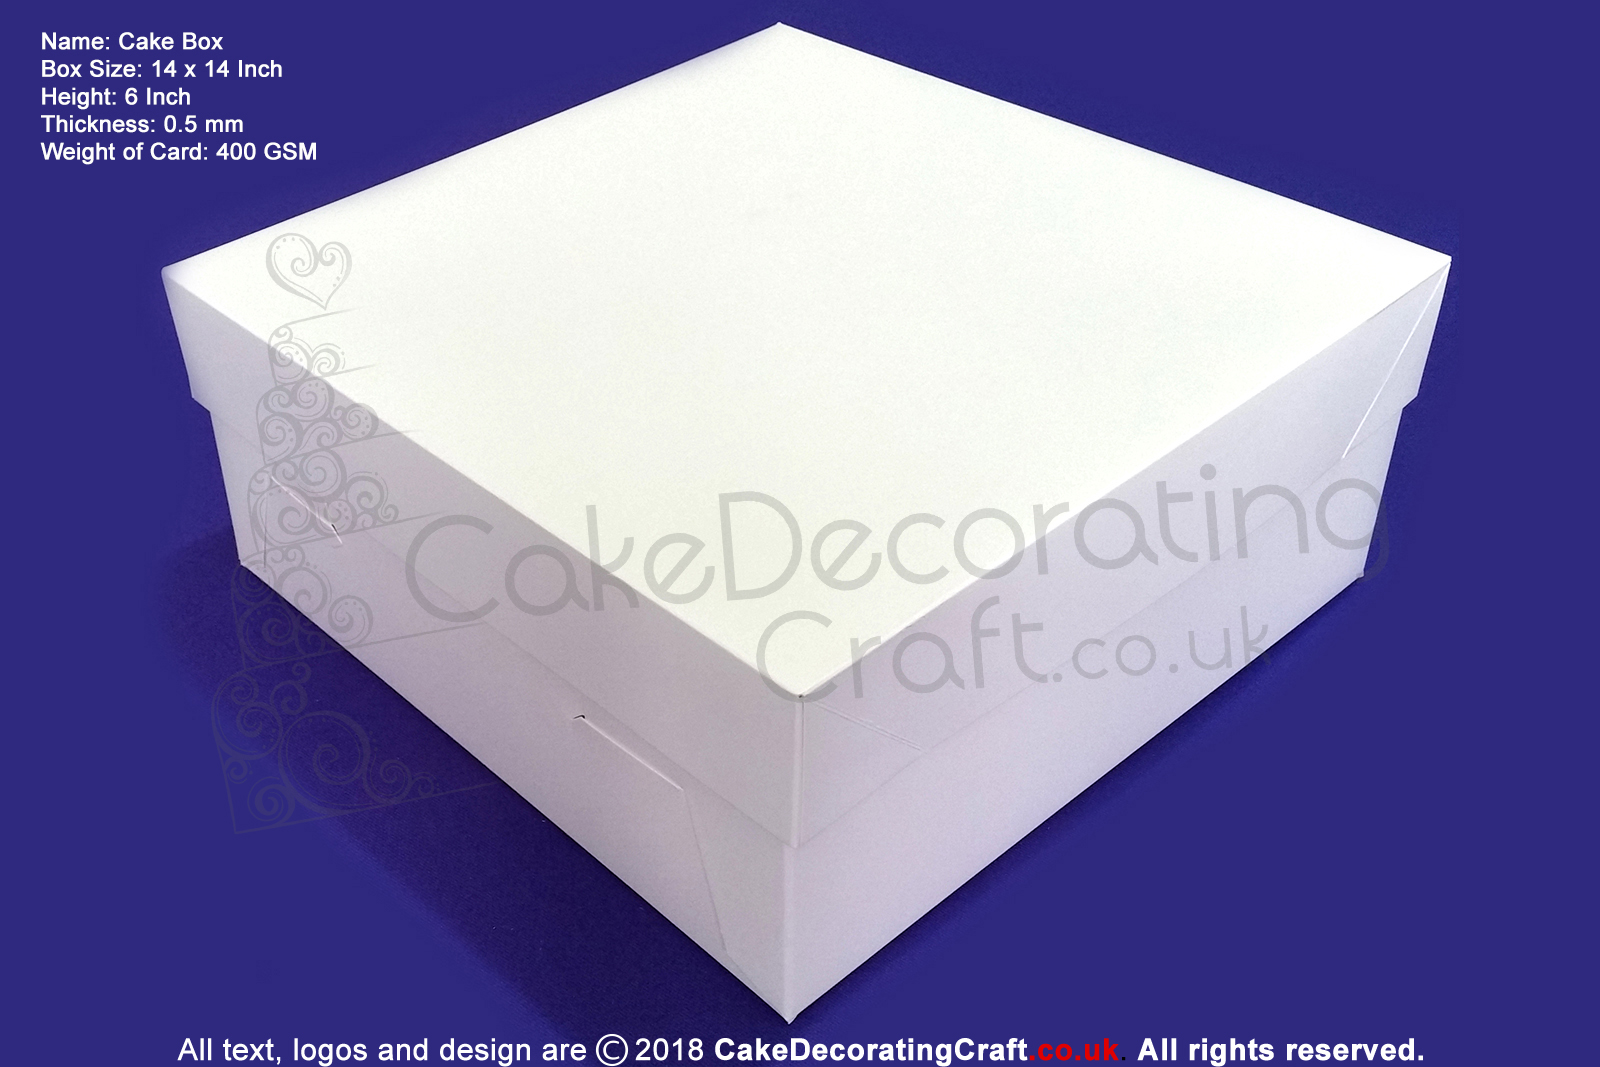 14" Inch | Cake Boxes + Lids | 0.5 mm Thick or 400 GSM | White | Strong | Premium Quality